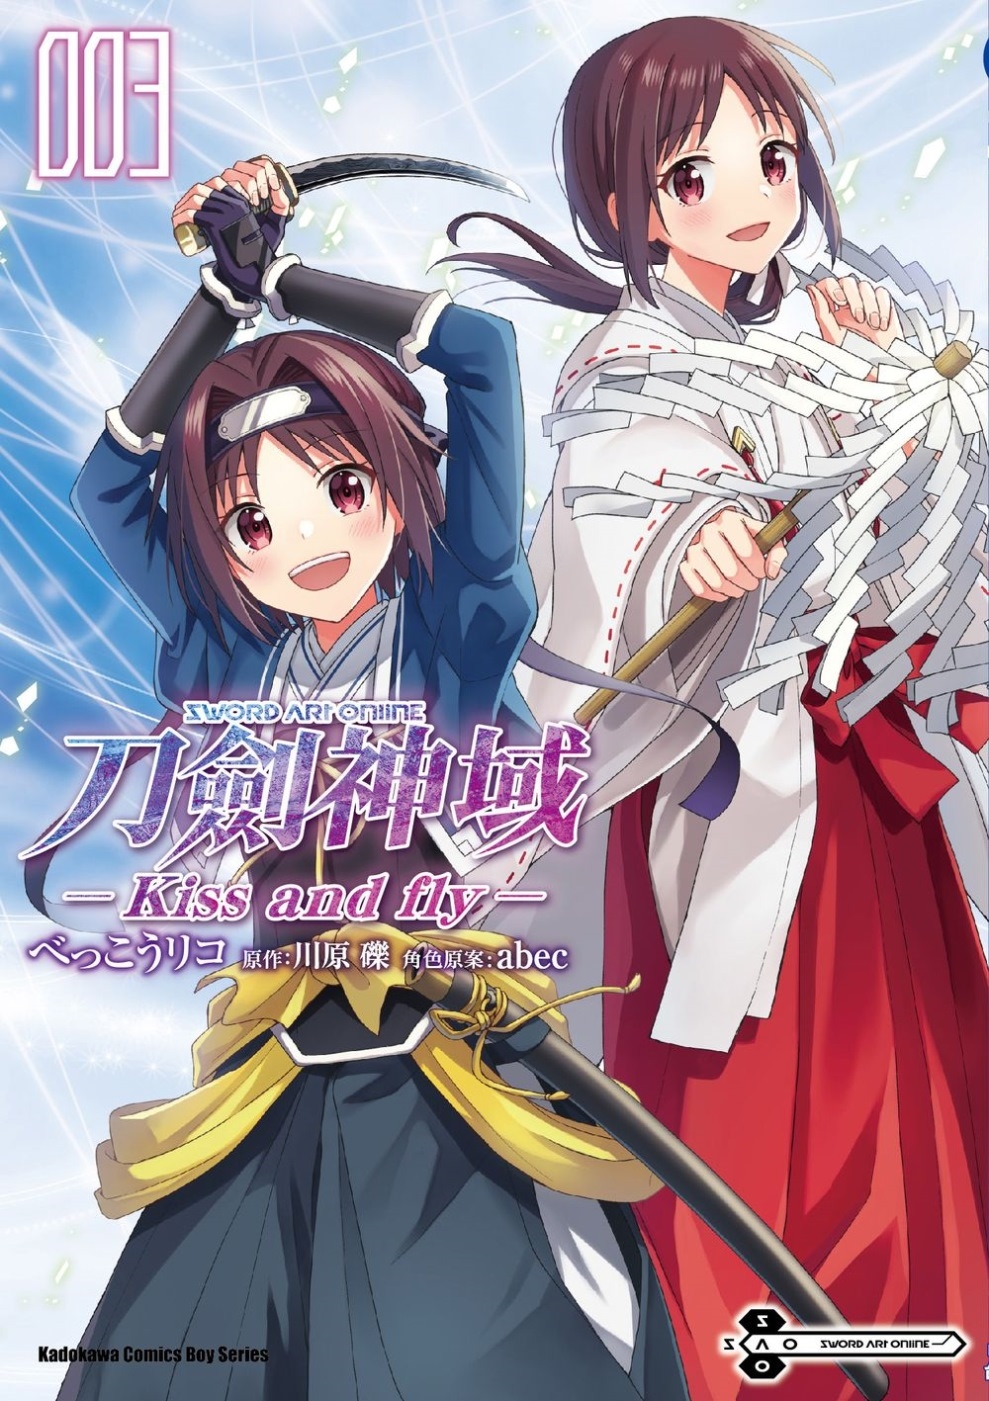 Sword Art Online刀劍神域 Kiss and fly (3) (完)